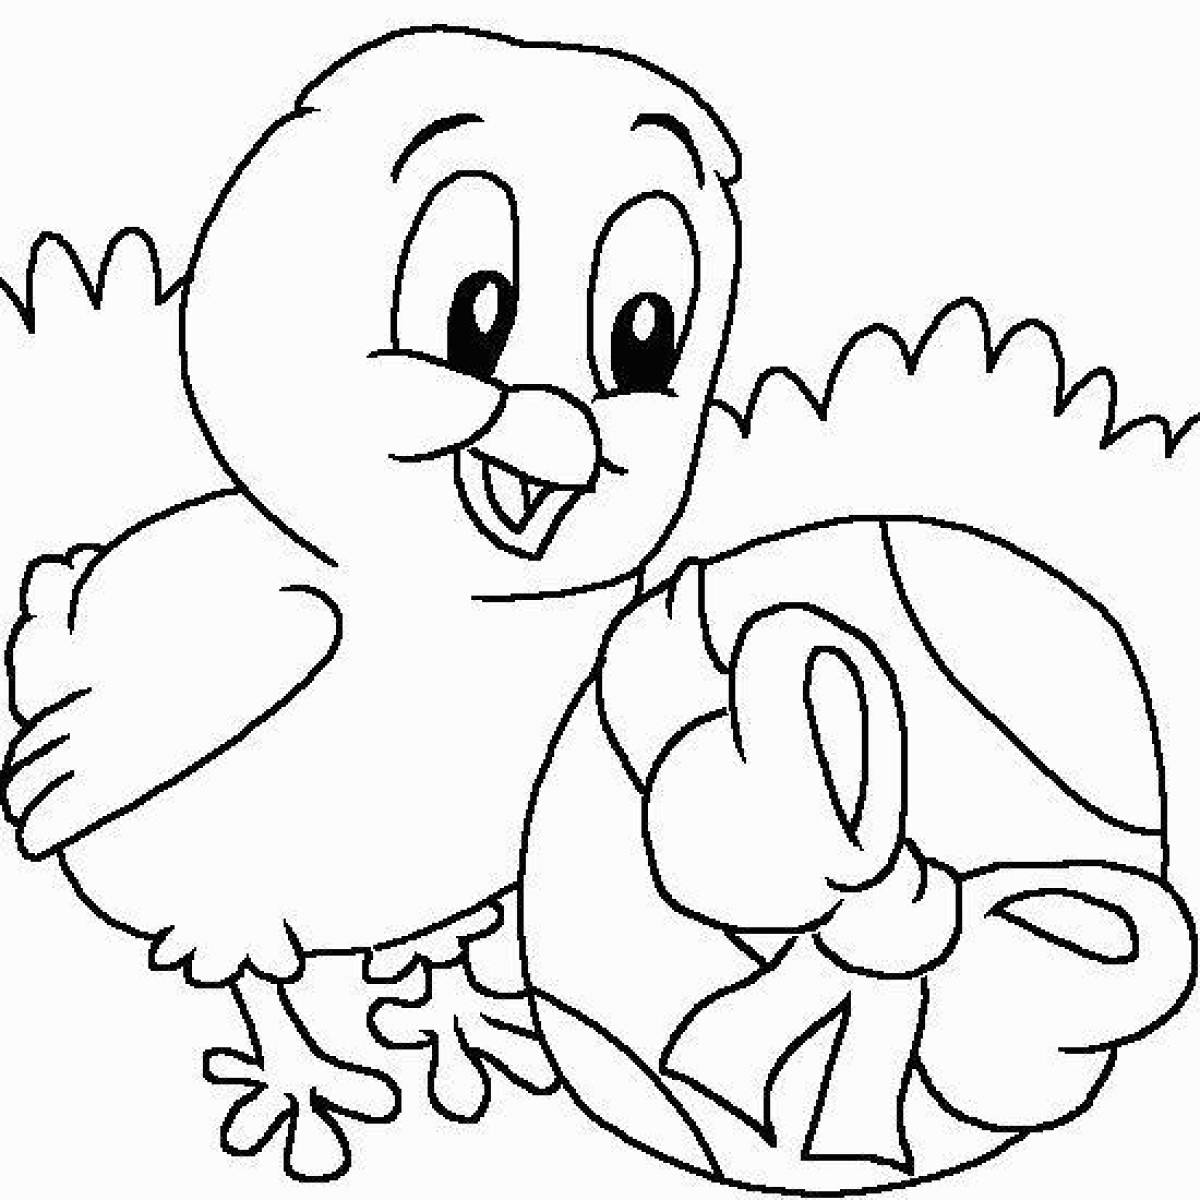 Sweet chick coloring book for children 3-4 years old